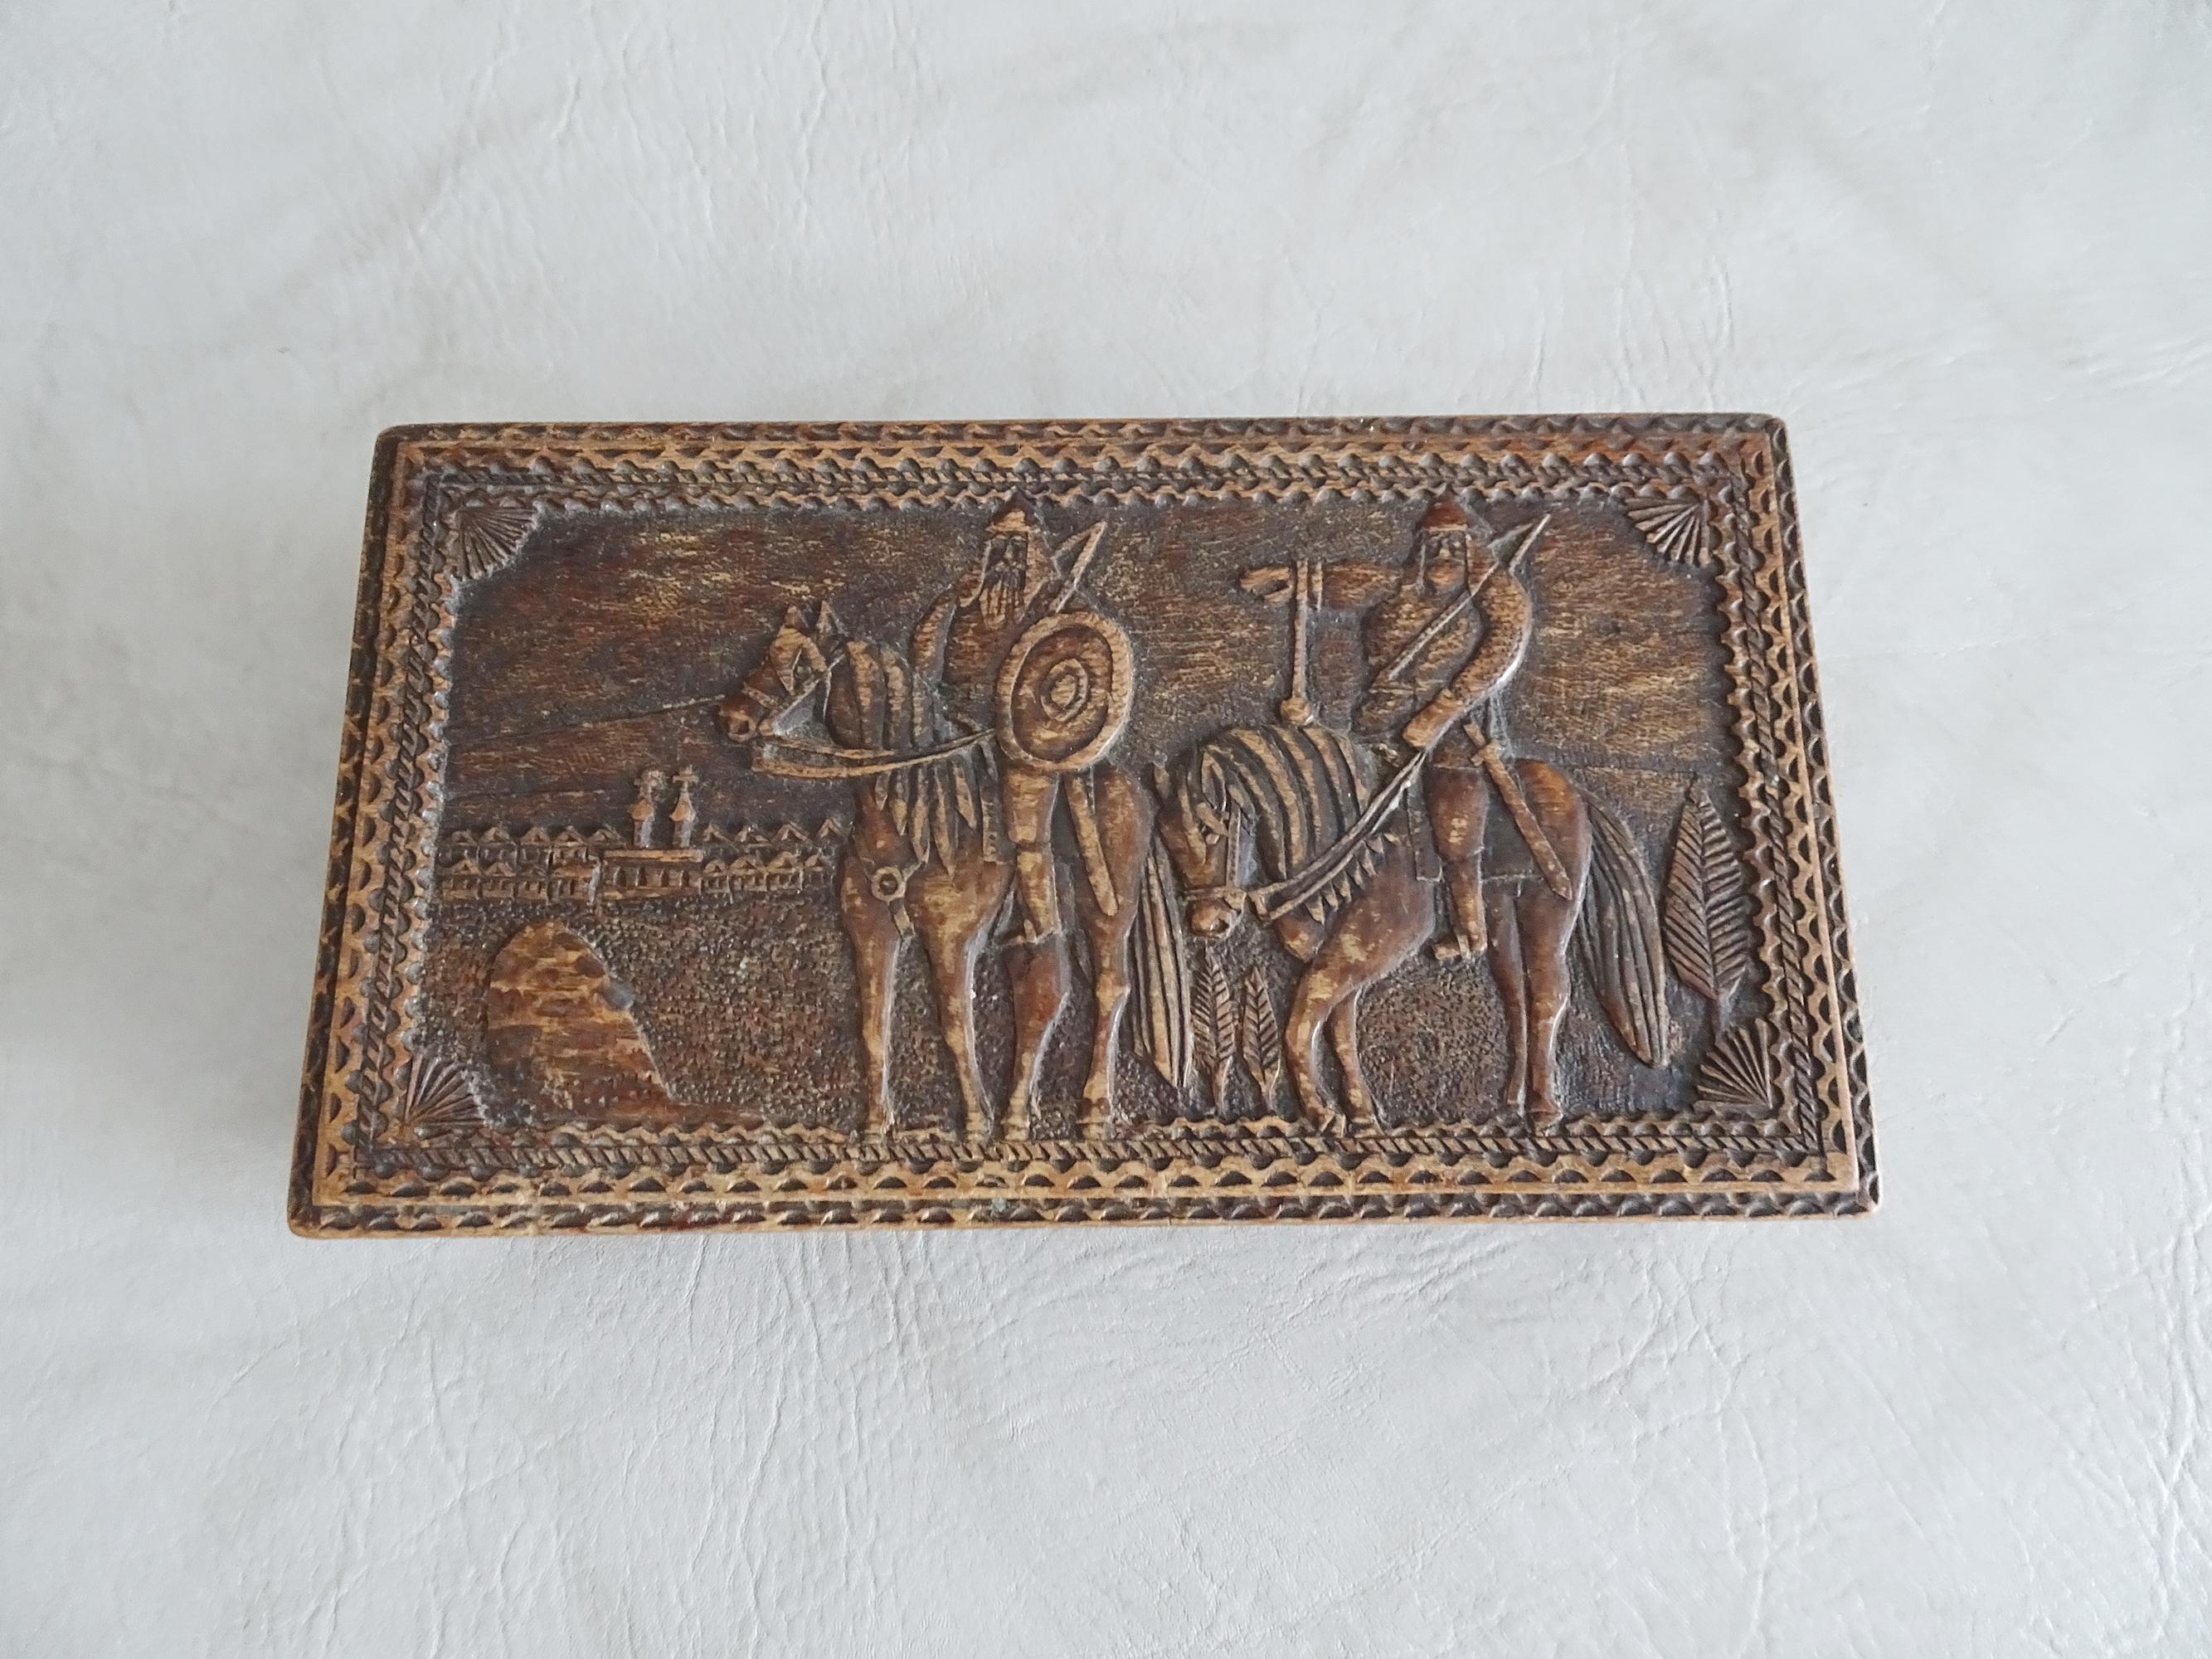 Arts & Crafts antique wooden box from historicism from 1900 to 1910. The wooden box shows a scene of two riders with shield and sword and a carrier pigeon in front and floral ornaments on the side. In the wooden lid a slightly disreputable and